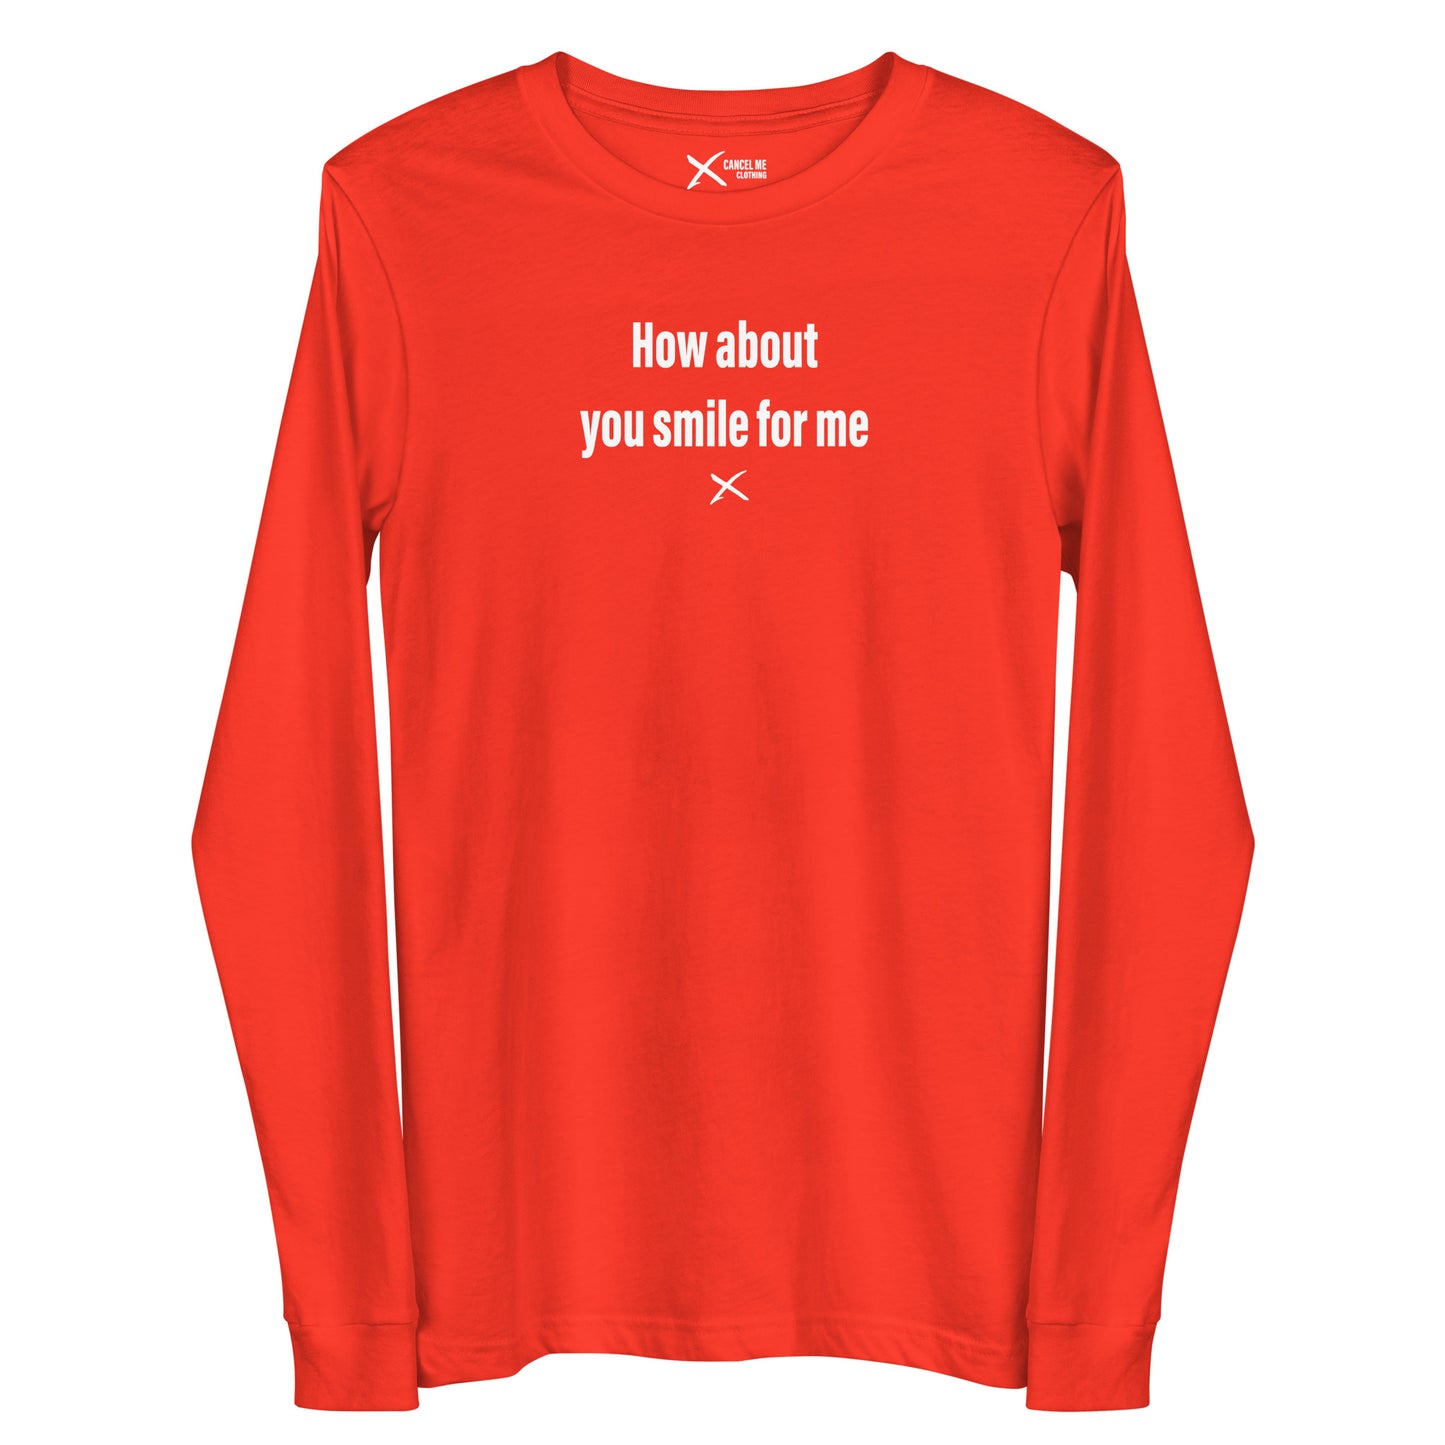 How about you smile for me - Longsleeve